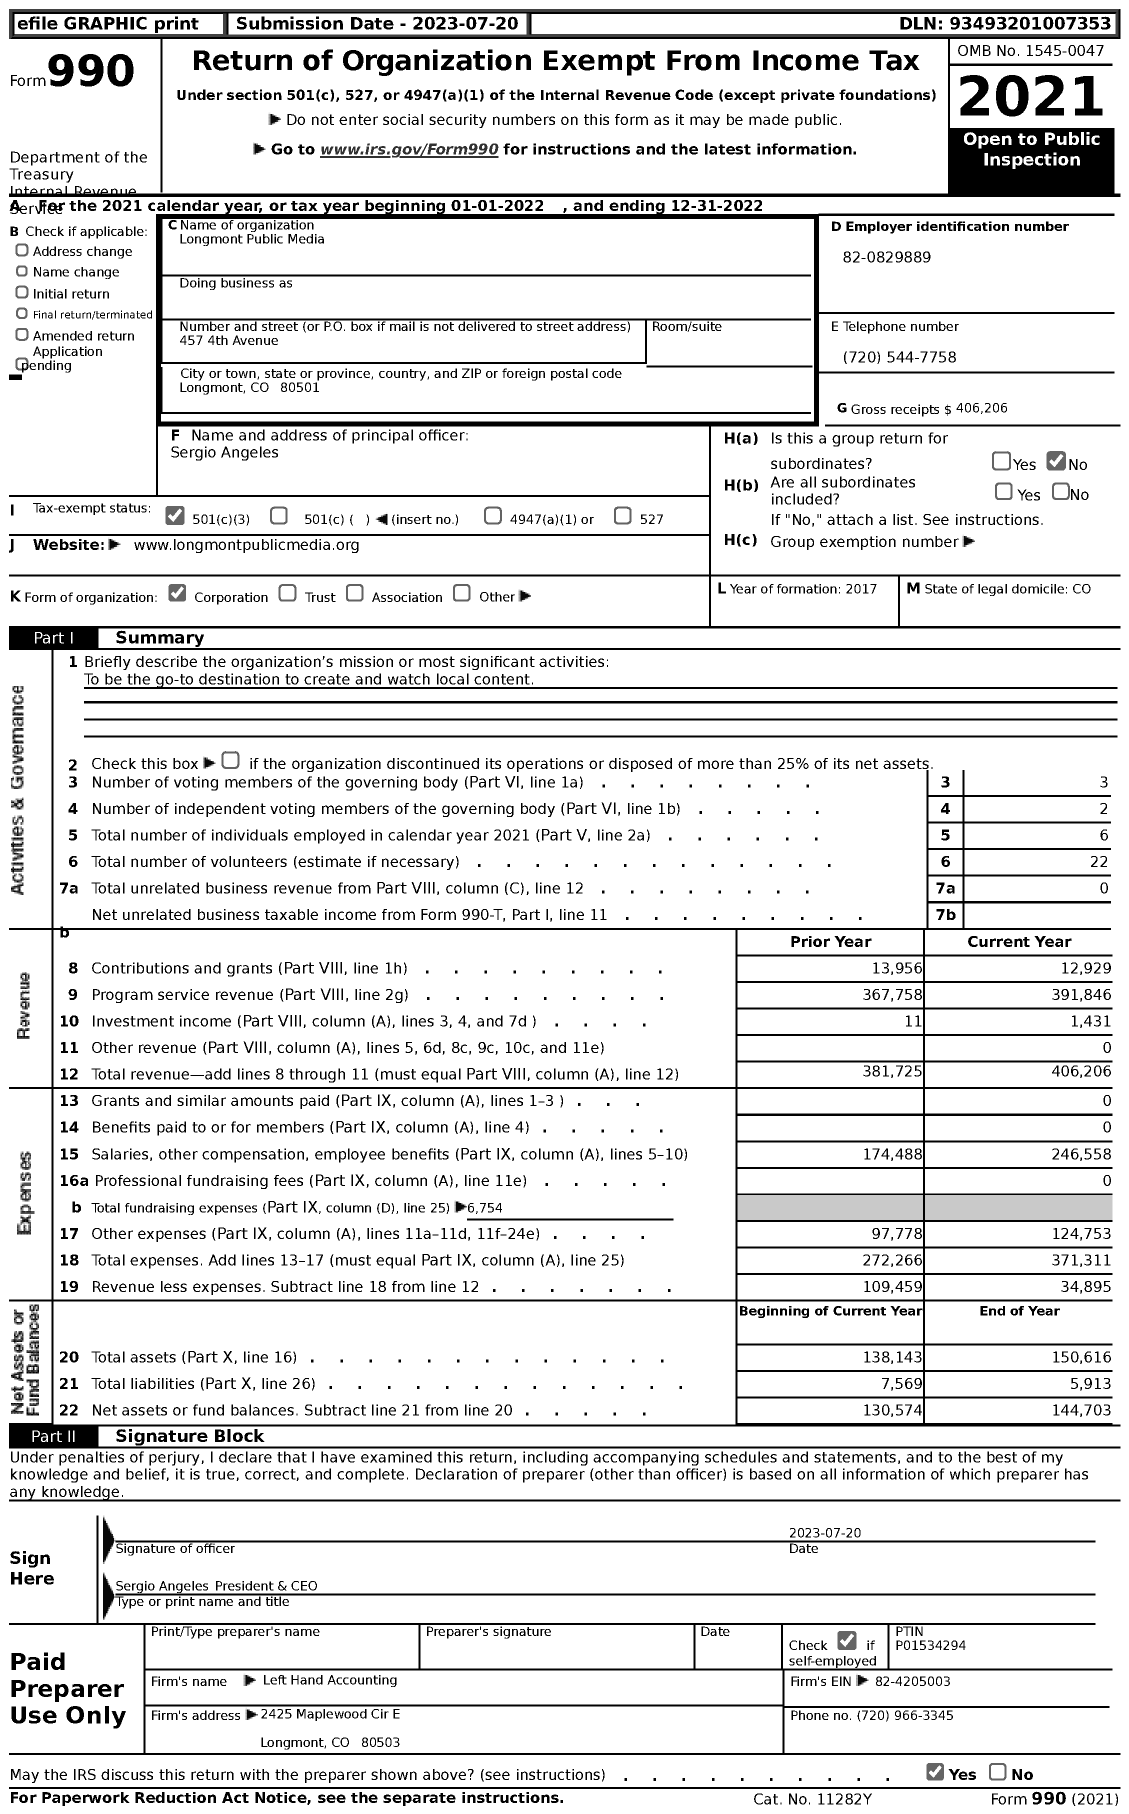 Image of first page of 2022 Form 990 for Longmont Public Media